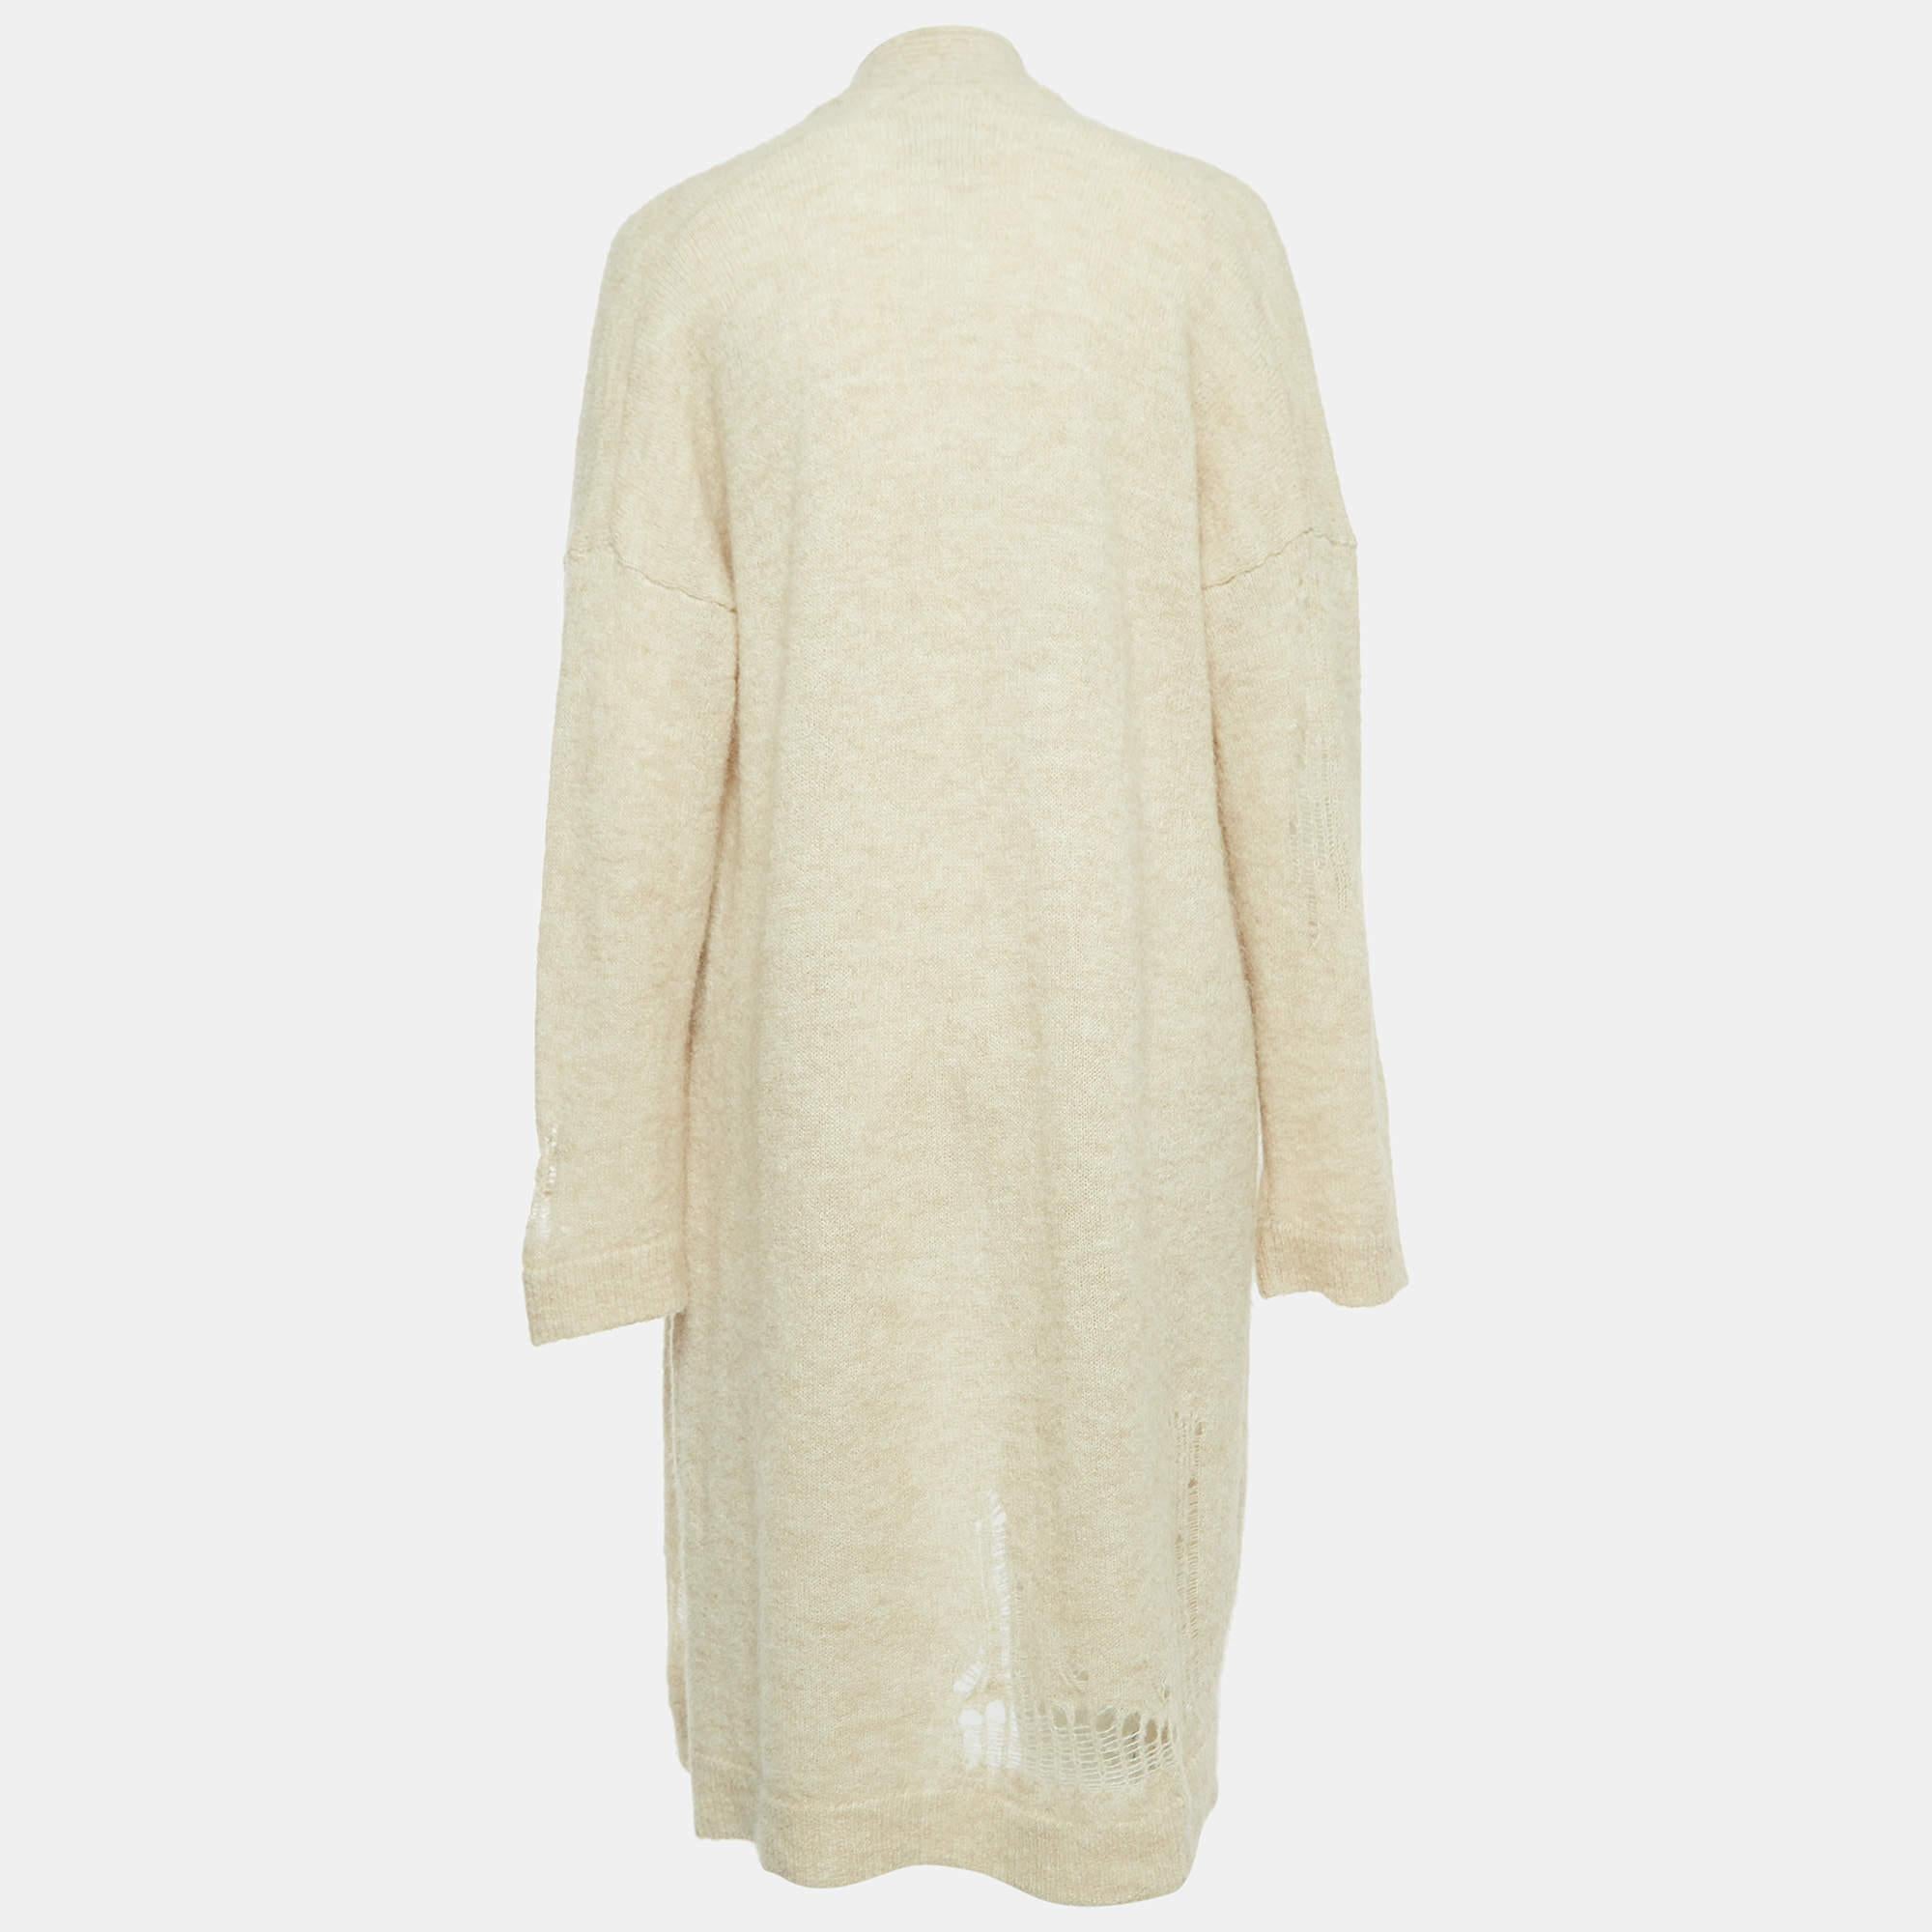 Whether you want to go out on casual outings with friends or just want to lounge around, this cardigan is a versatile piece and can be styled in many ways. It has been made using fine fabric.

